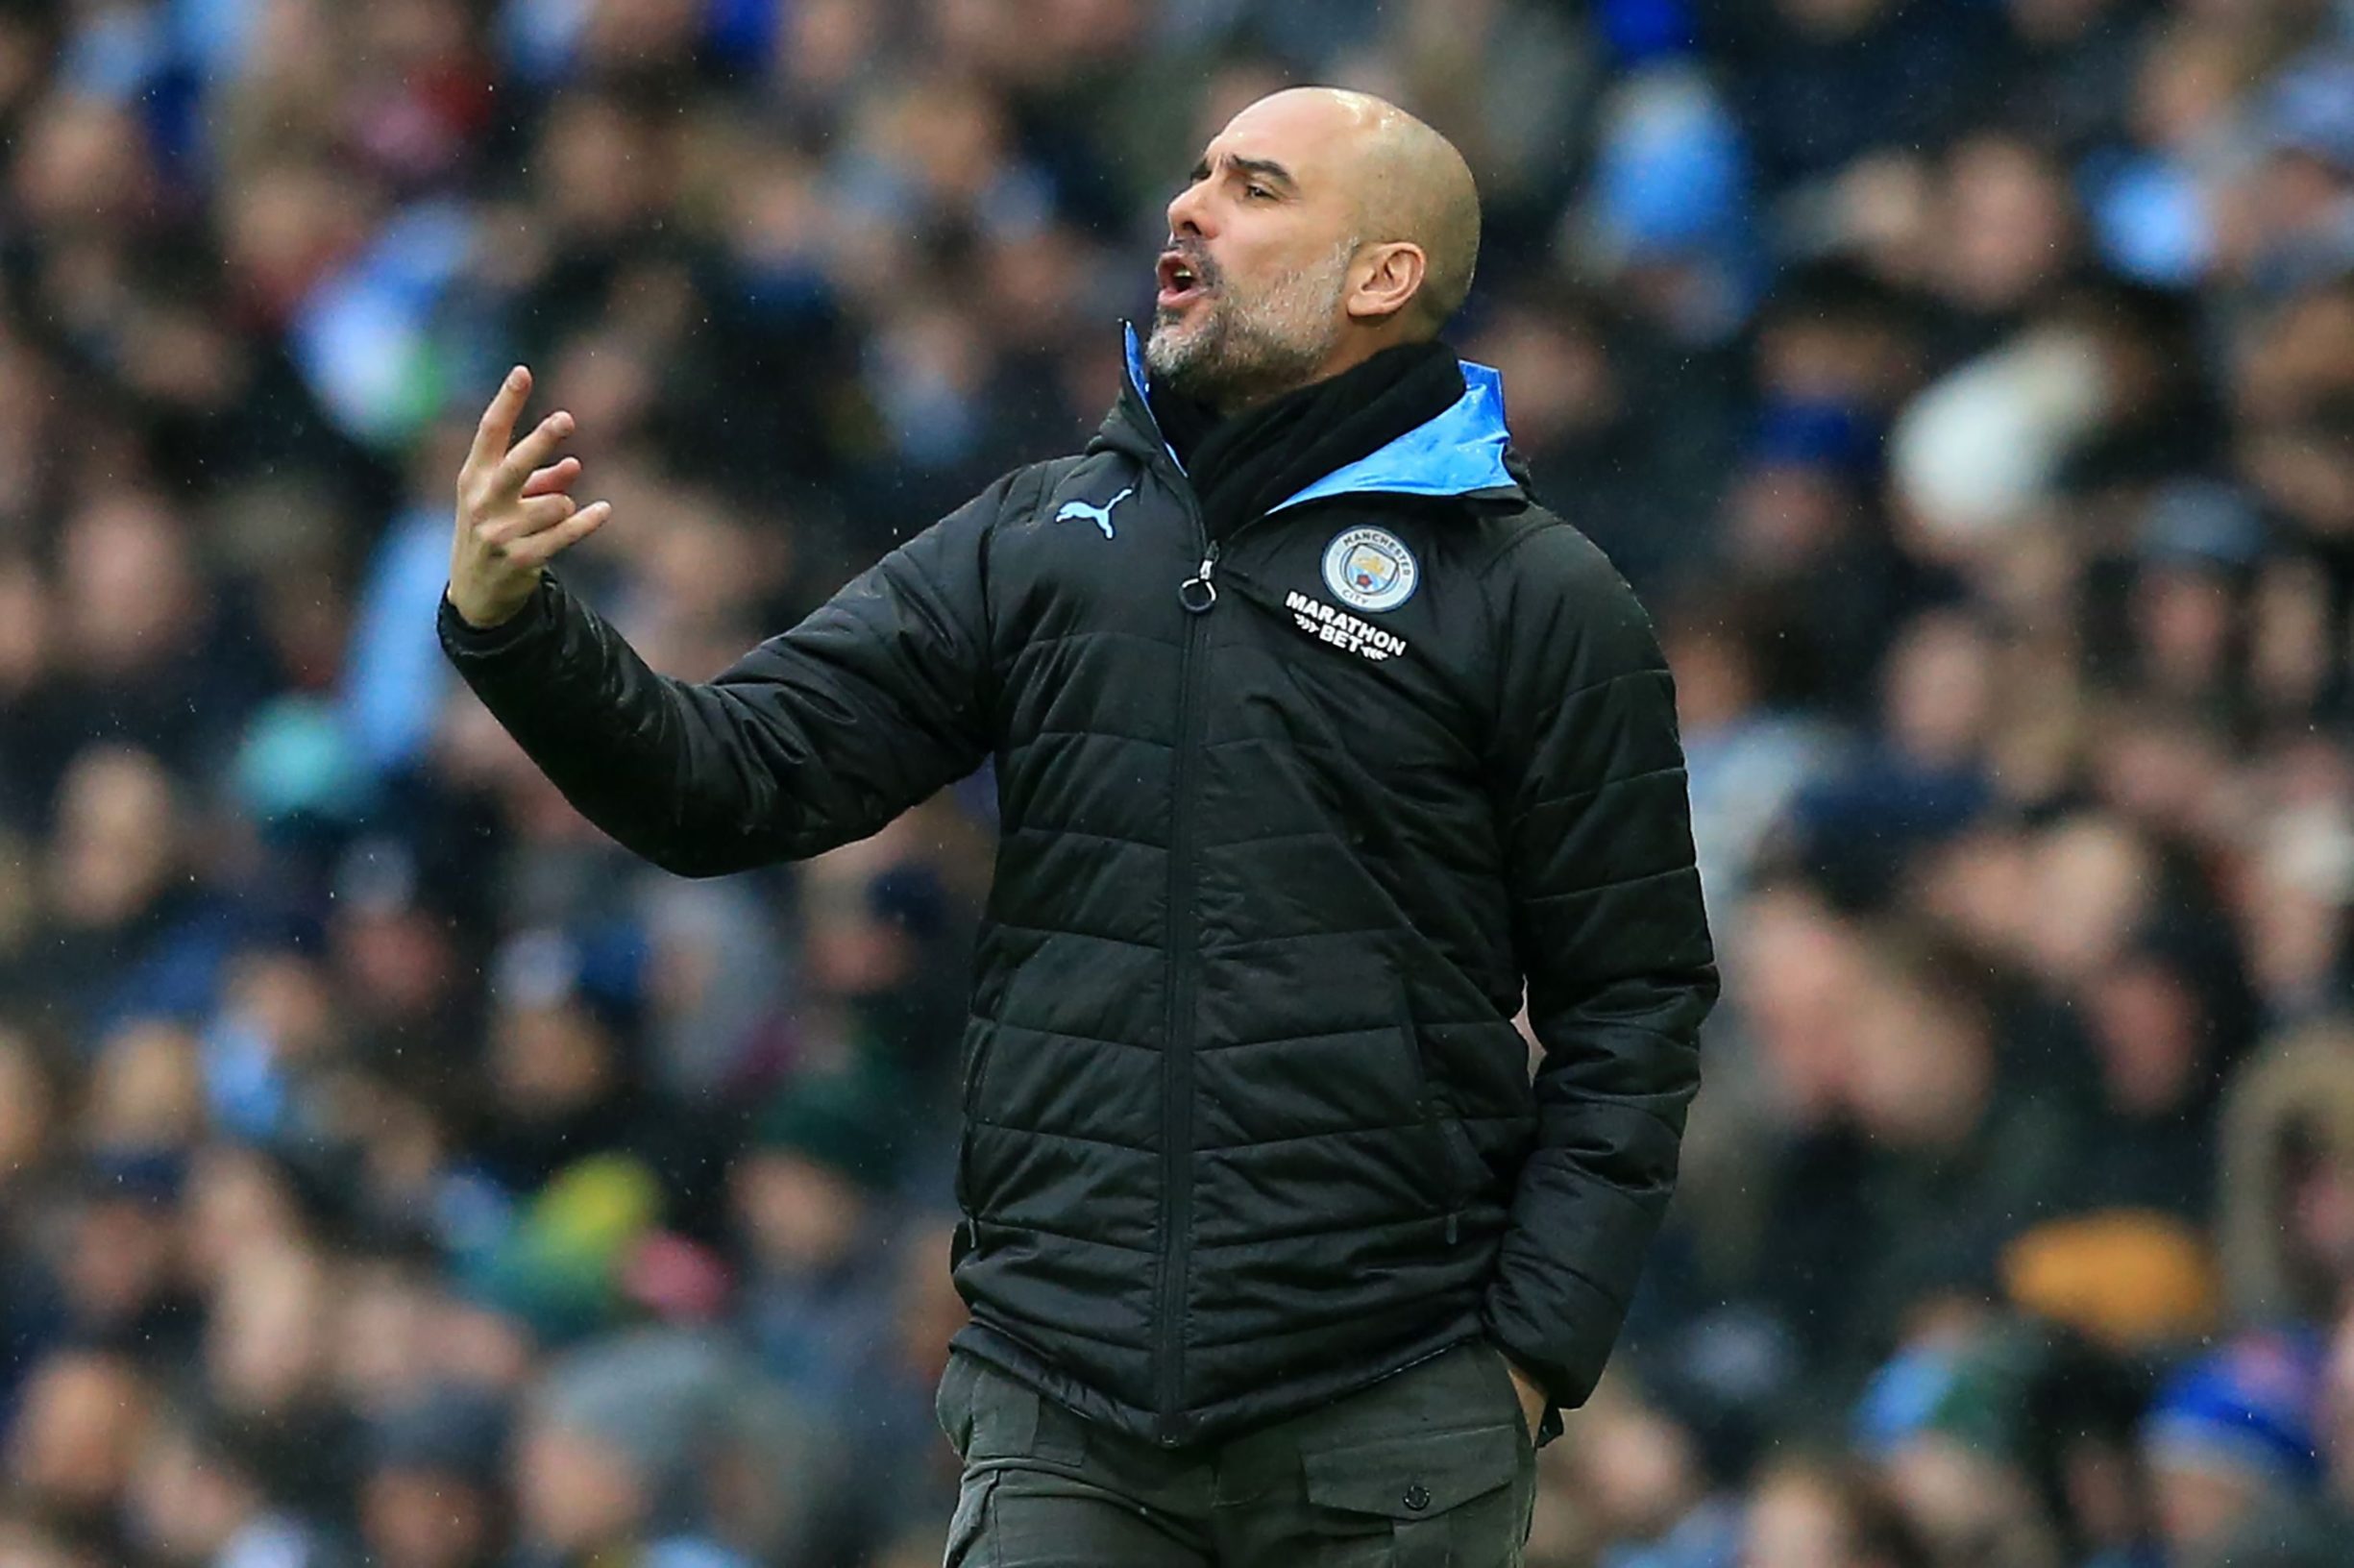 Manchester City's Spanish manager Pep Guardiola gestures on the touchline during the English FA Cup fourth round football match between Manchester City and Fulham at the Etihad Stadium in Manchester, north west England, on January 26, 2020. (Photo by Lindsey Parnaby / AFP) / RESTRICTED TO EDITORIAL USE. No use with unauthorized audio, video, data, fixture lists, club/league logos or 'live' services. Online in-match use limited to 120 images. An additional 40 images may be used in extra time. No video emulation. Social media in-match use limited to 120 images. An additional 40 images may be used in extra time. No use in betting publications, games or single club/league/player publications. / 